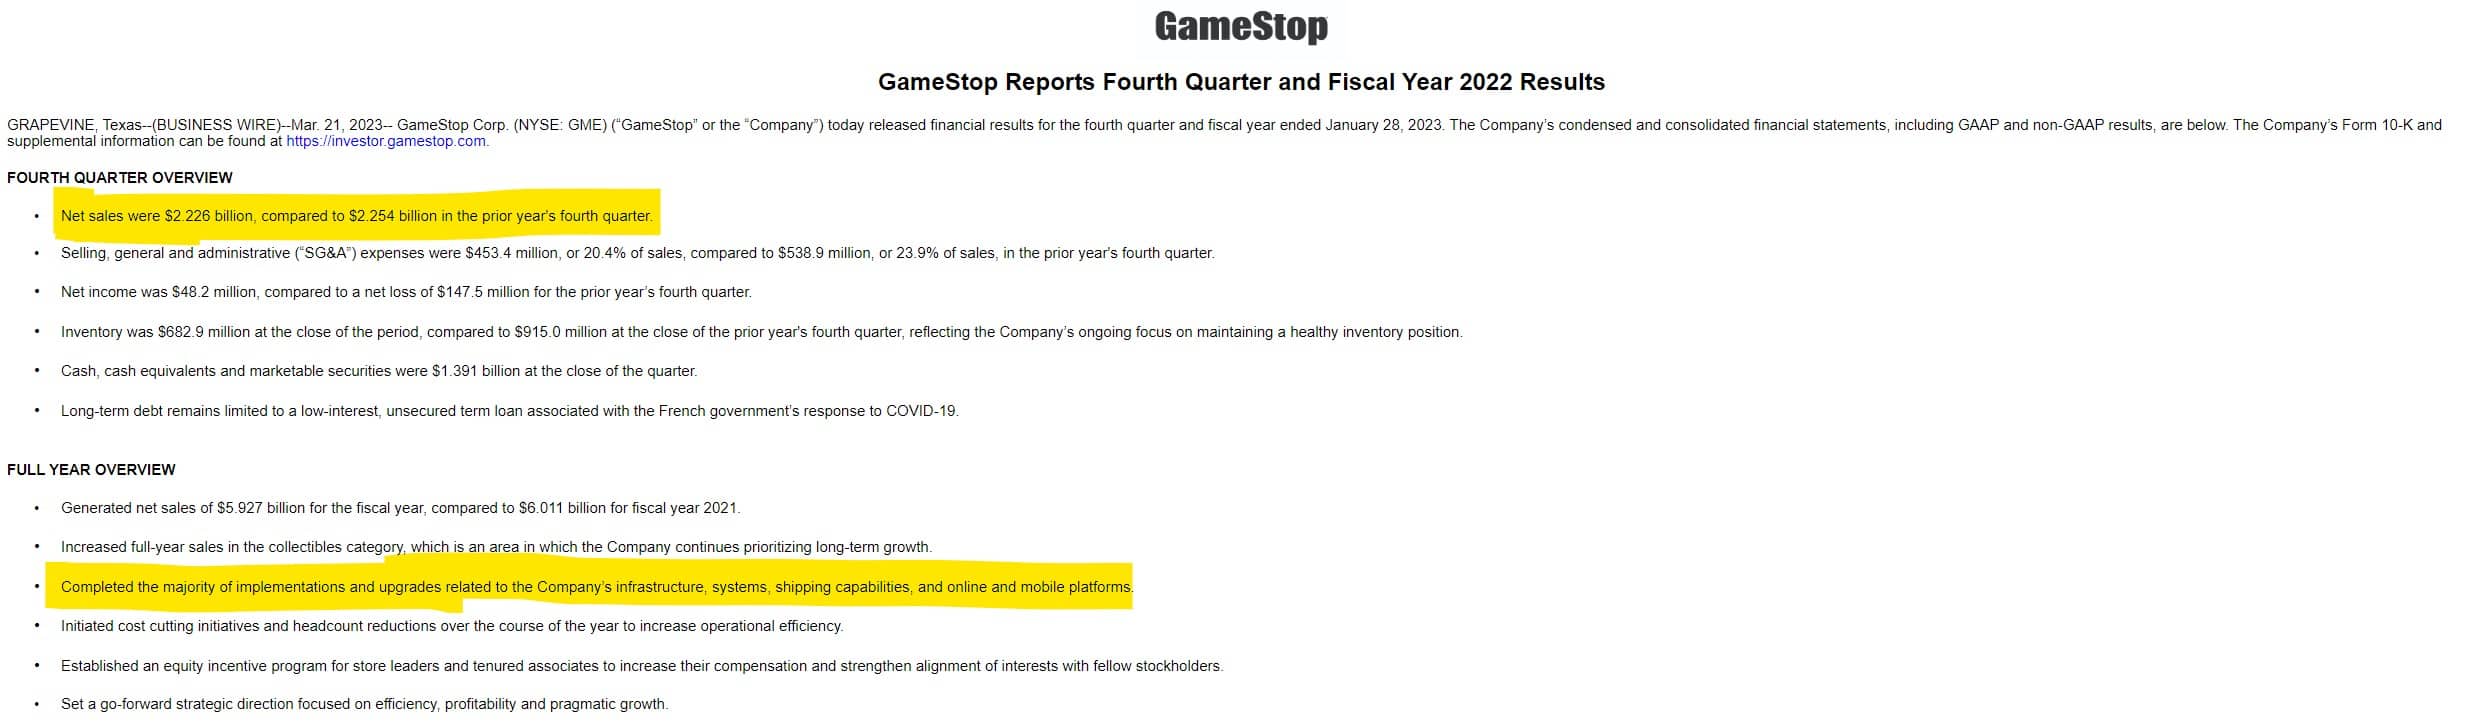 GameStop Reports Fourth Quarter and Fiscal Year 2022 Results